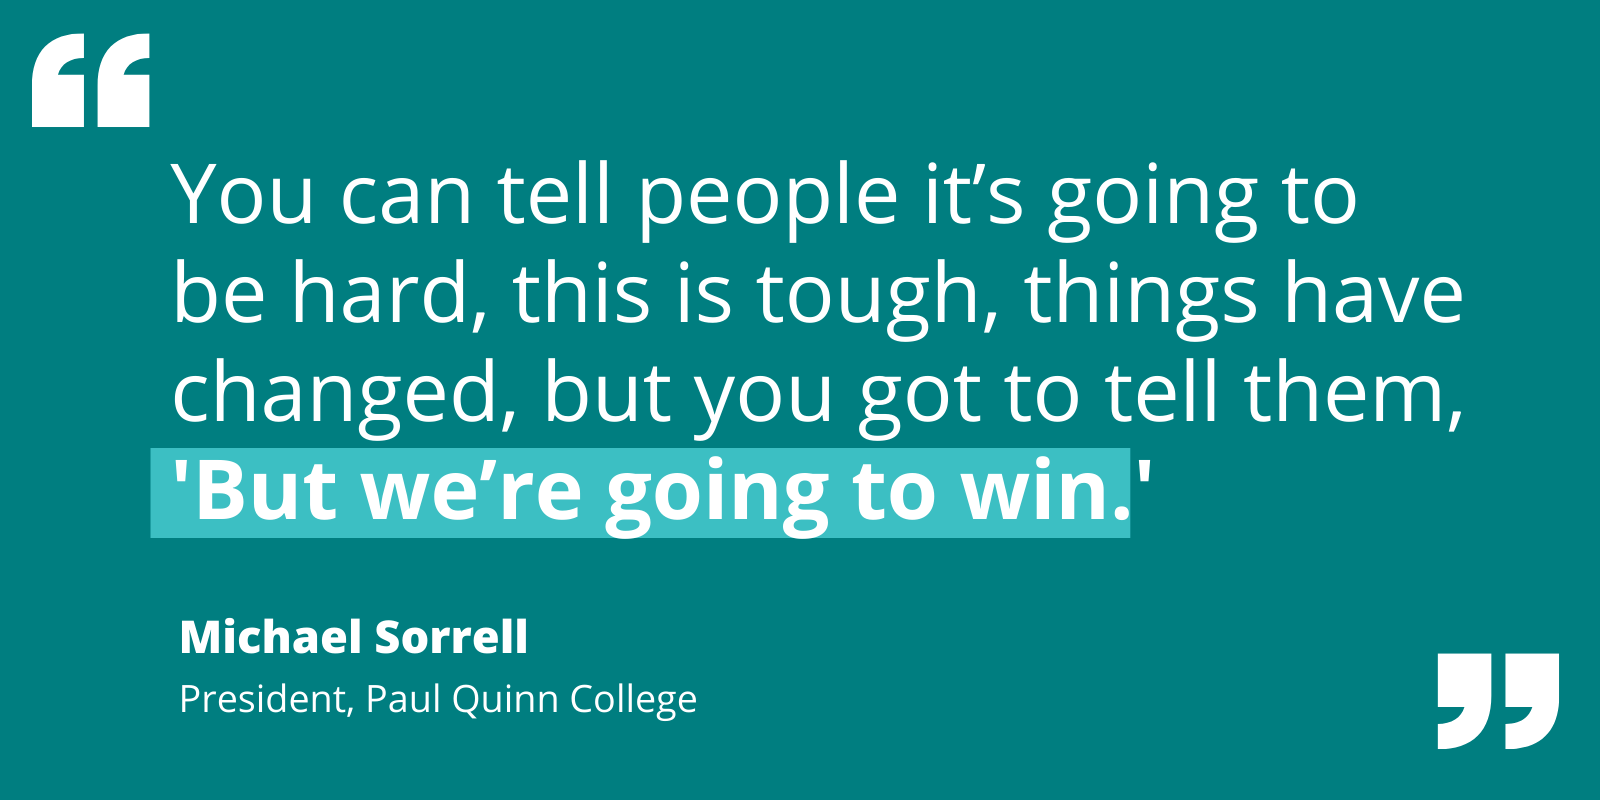 Quote by Michael Sorrell re: the need to acknowledge that times are hard while emphasizing, "But we’re going to win."